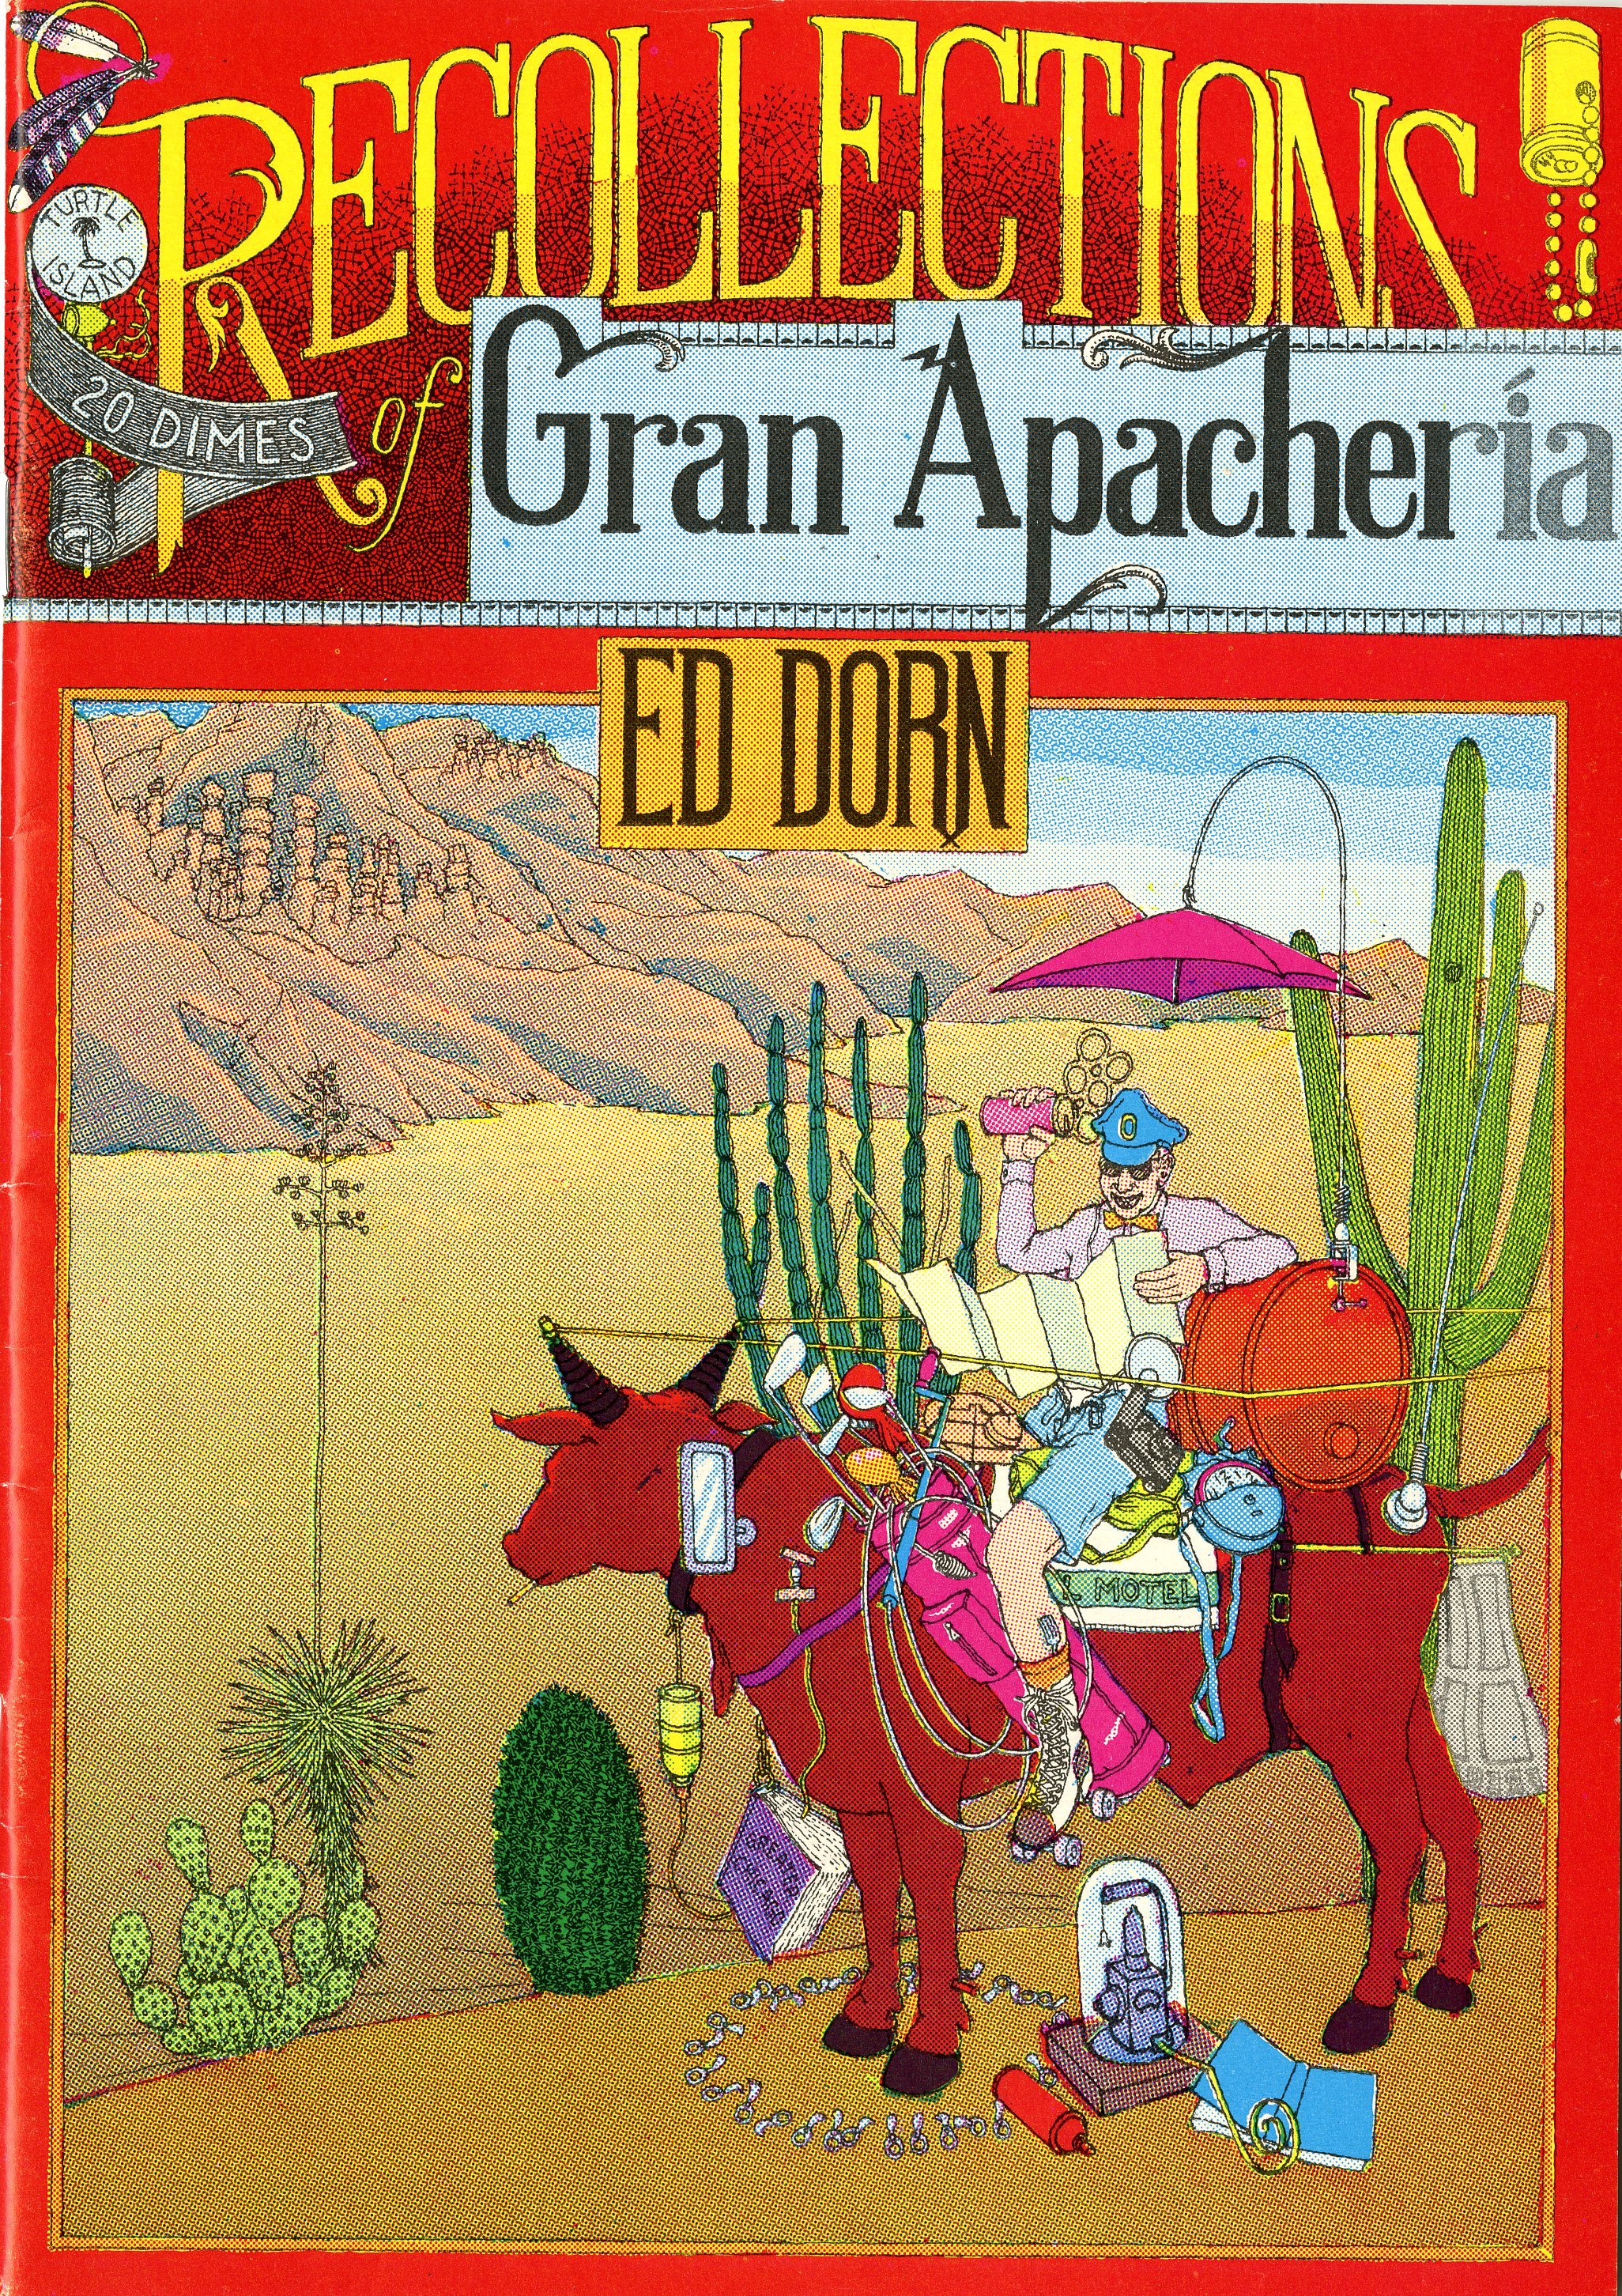 Dorn, Edward. Recollections of Gran Apachería. Paper edition. Turtle Island Foundation, 1974. Cover illustration by Michael Myers, from the Zephyrus Image Press records